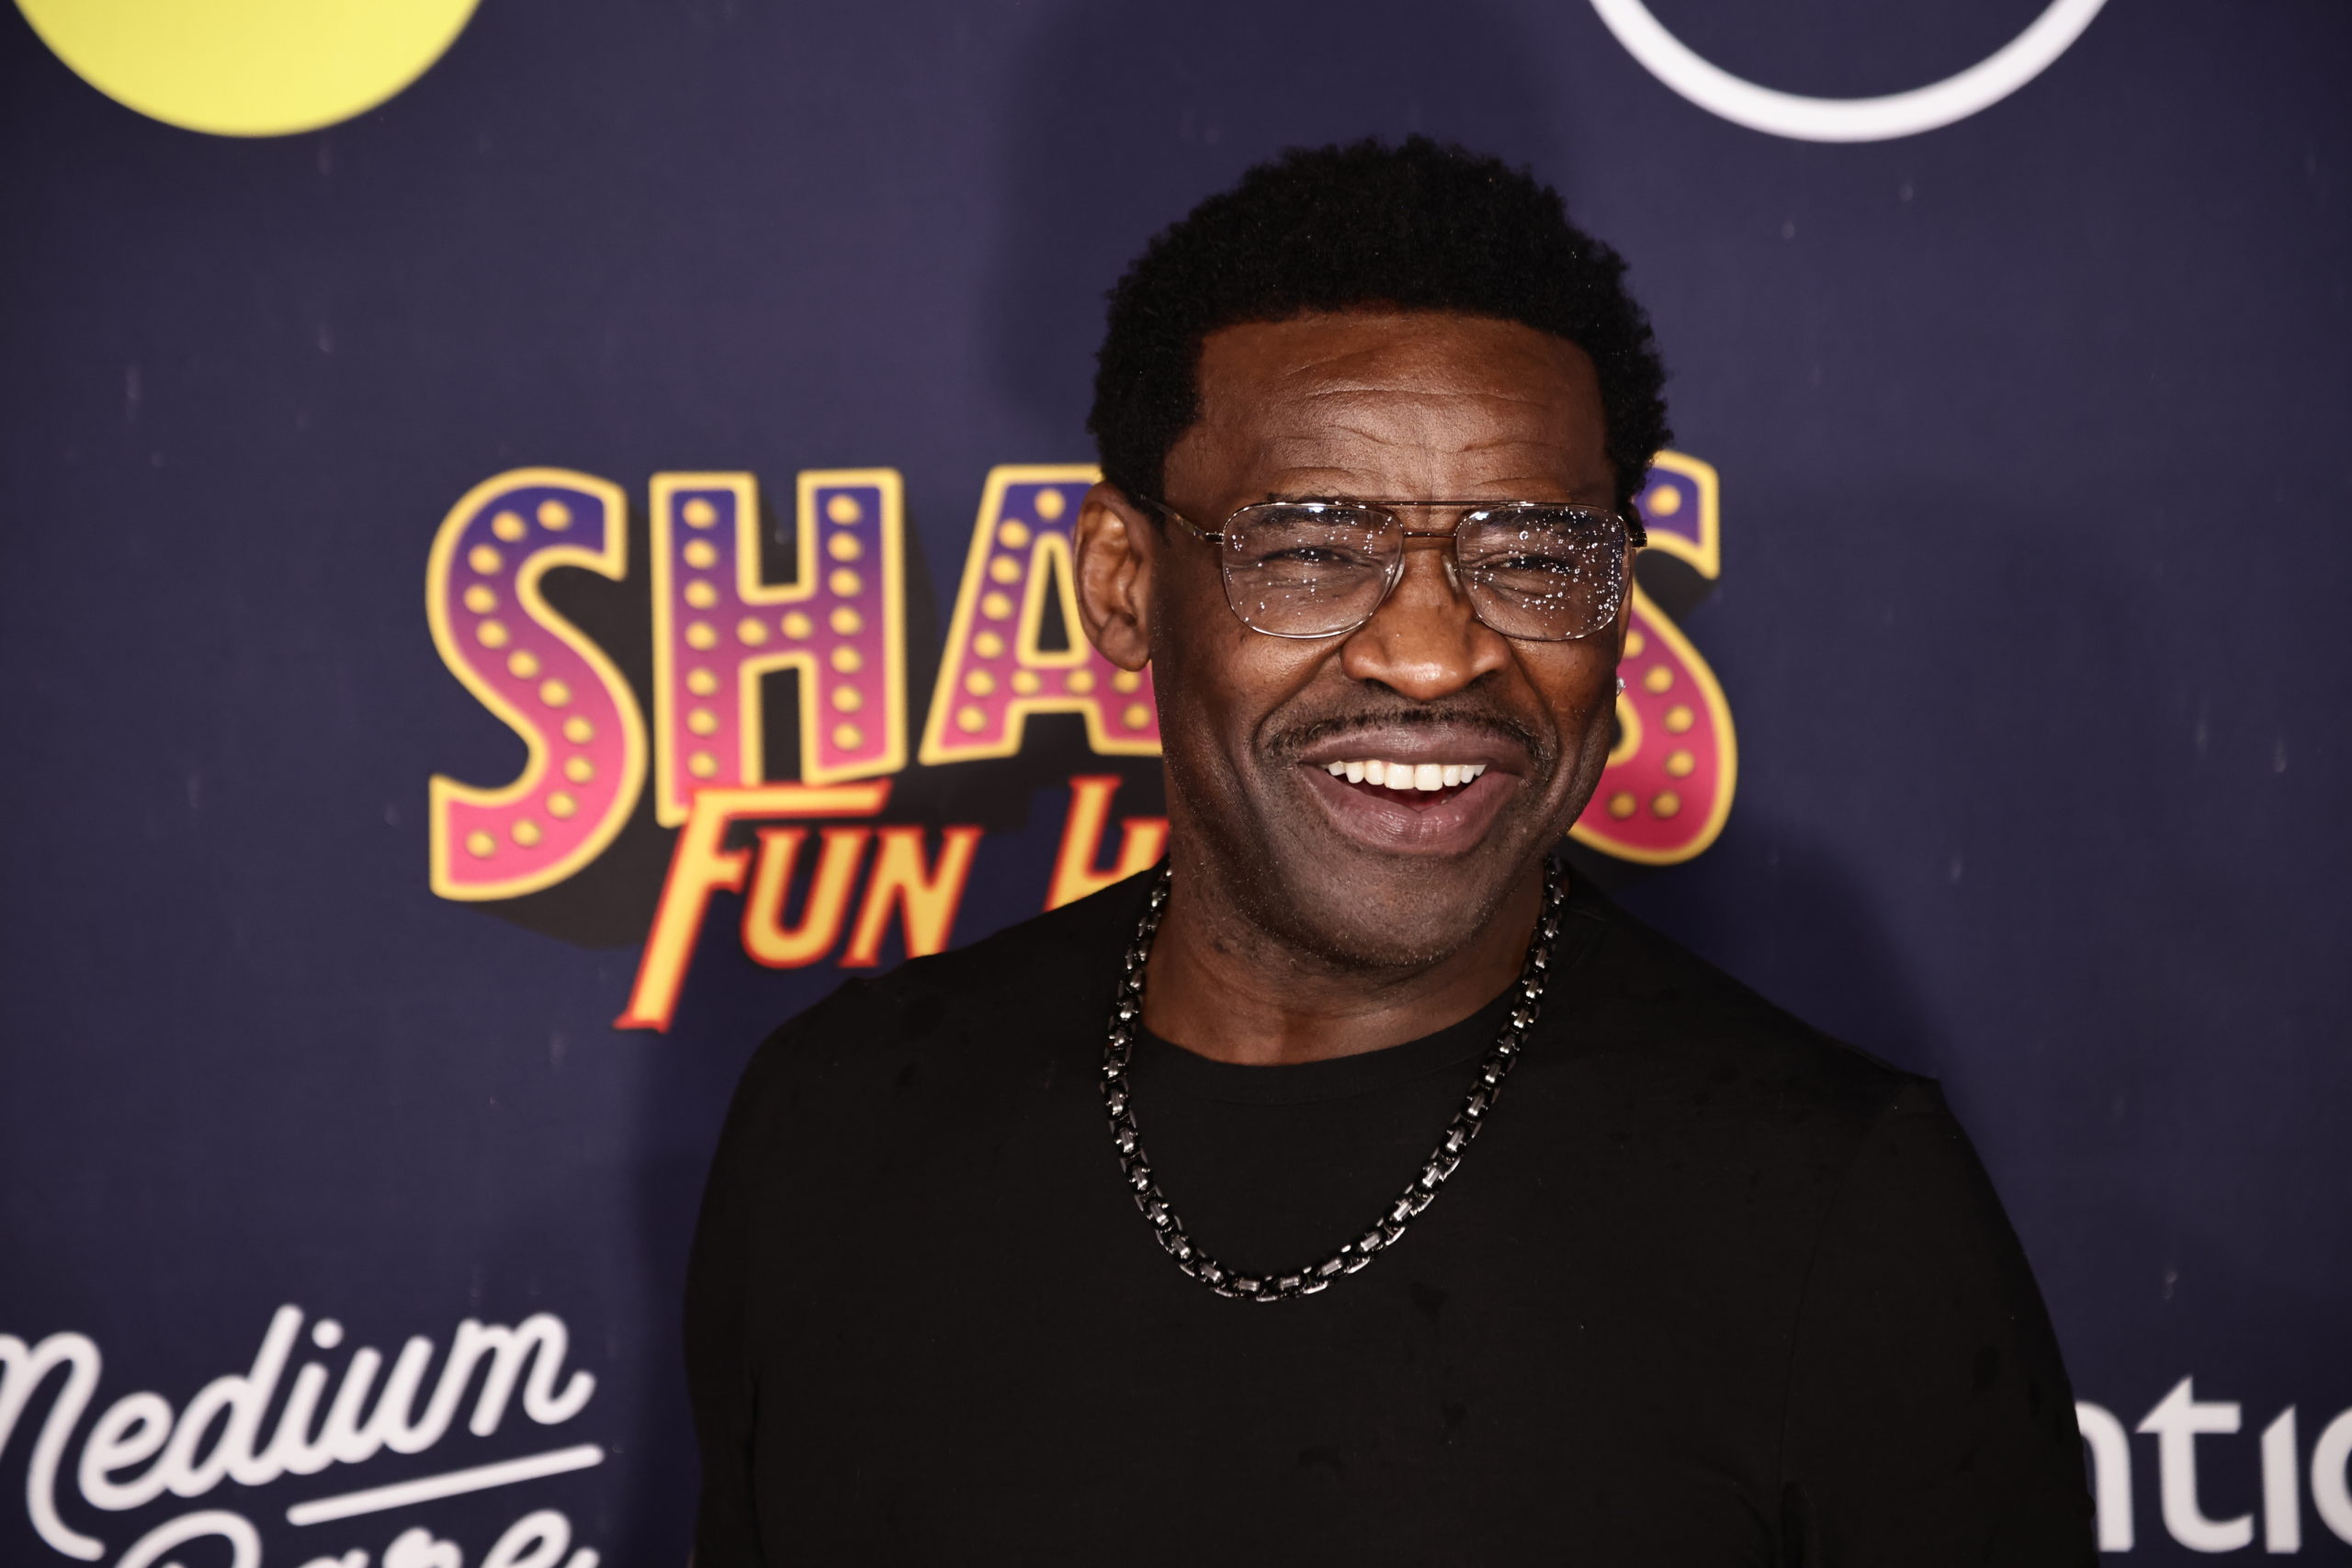 LAS VEGAS, NEVADA - FEBRUARY 09: Michael Irvin attends 'Shaq's Fun House' at XS nightclub at Encore Las Vegas on February 09, 2024 in Las Vegas, Nevada. (Photo by Greg Doherty/Getty Images)